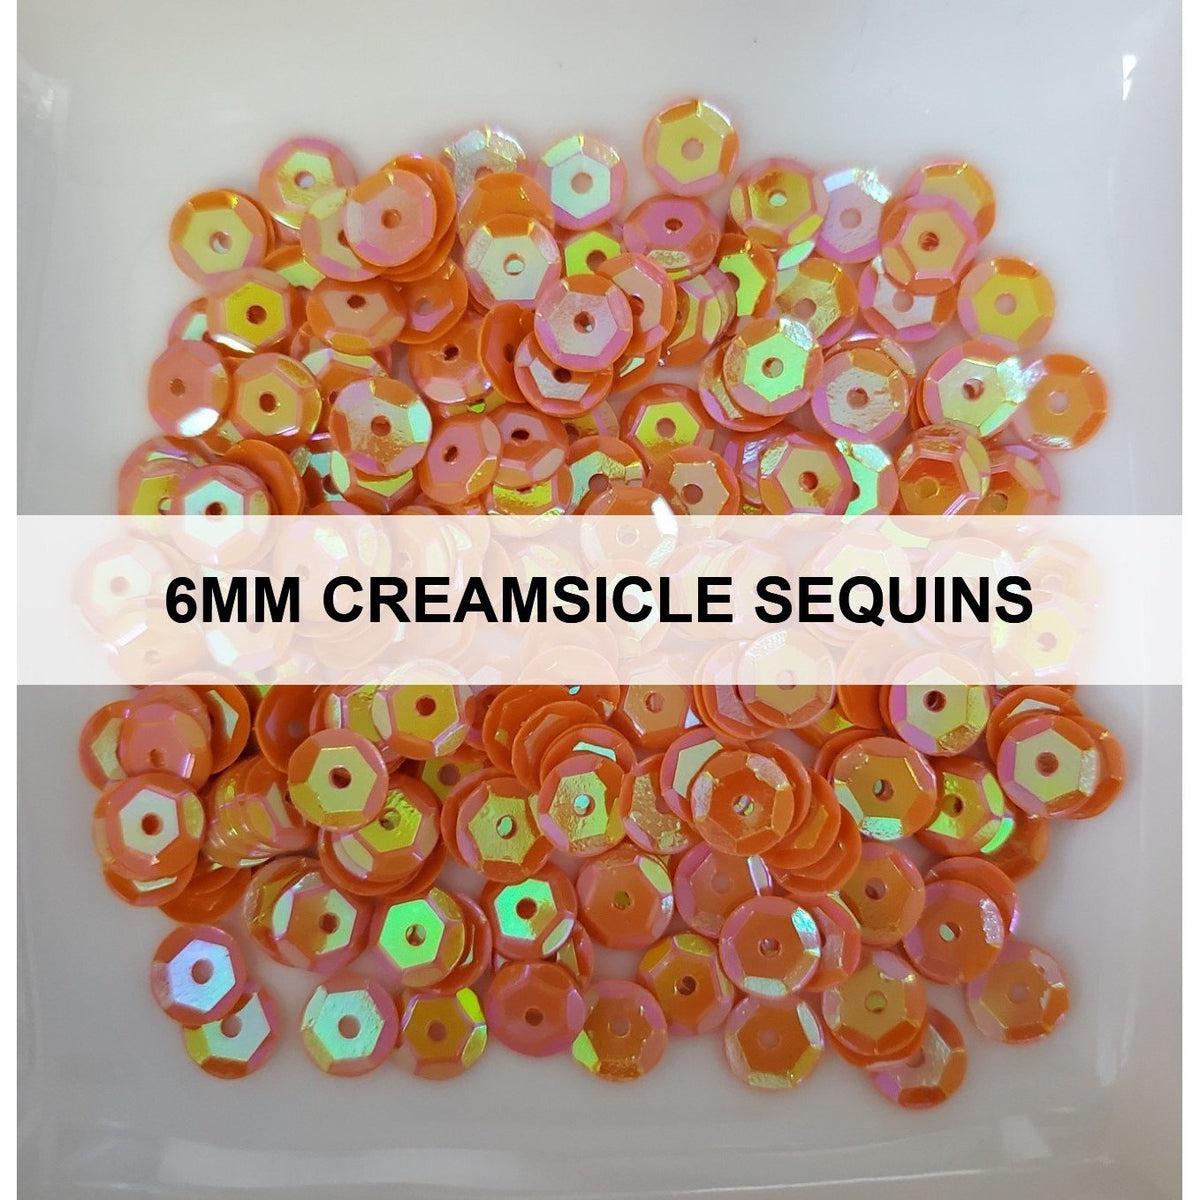 6mm Creamsicle Sequins